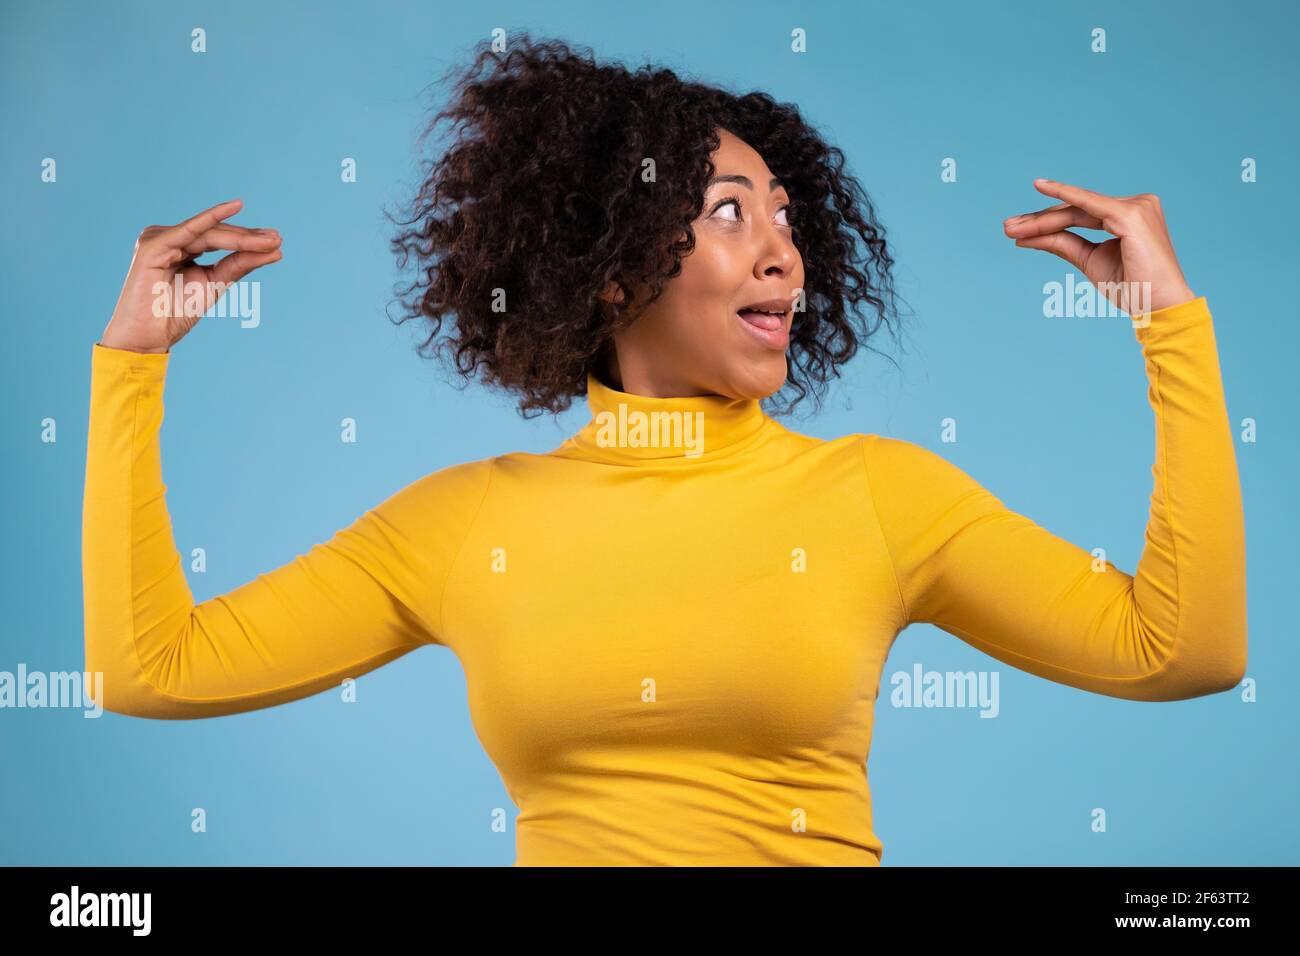 Pretty african woman showing bla-bla-bla gesture with hands isolated on blue background. Empty promises, blah concept. Lier. Stock Photo